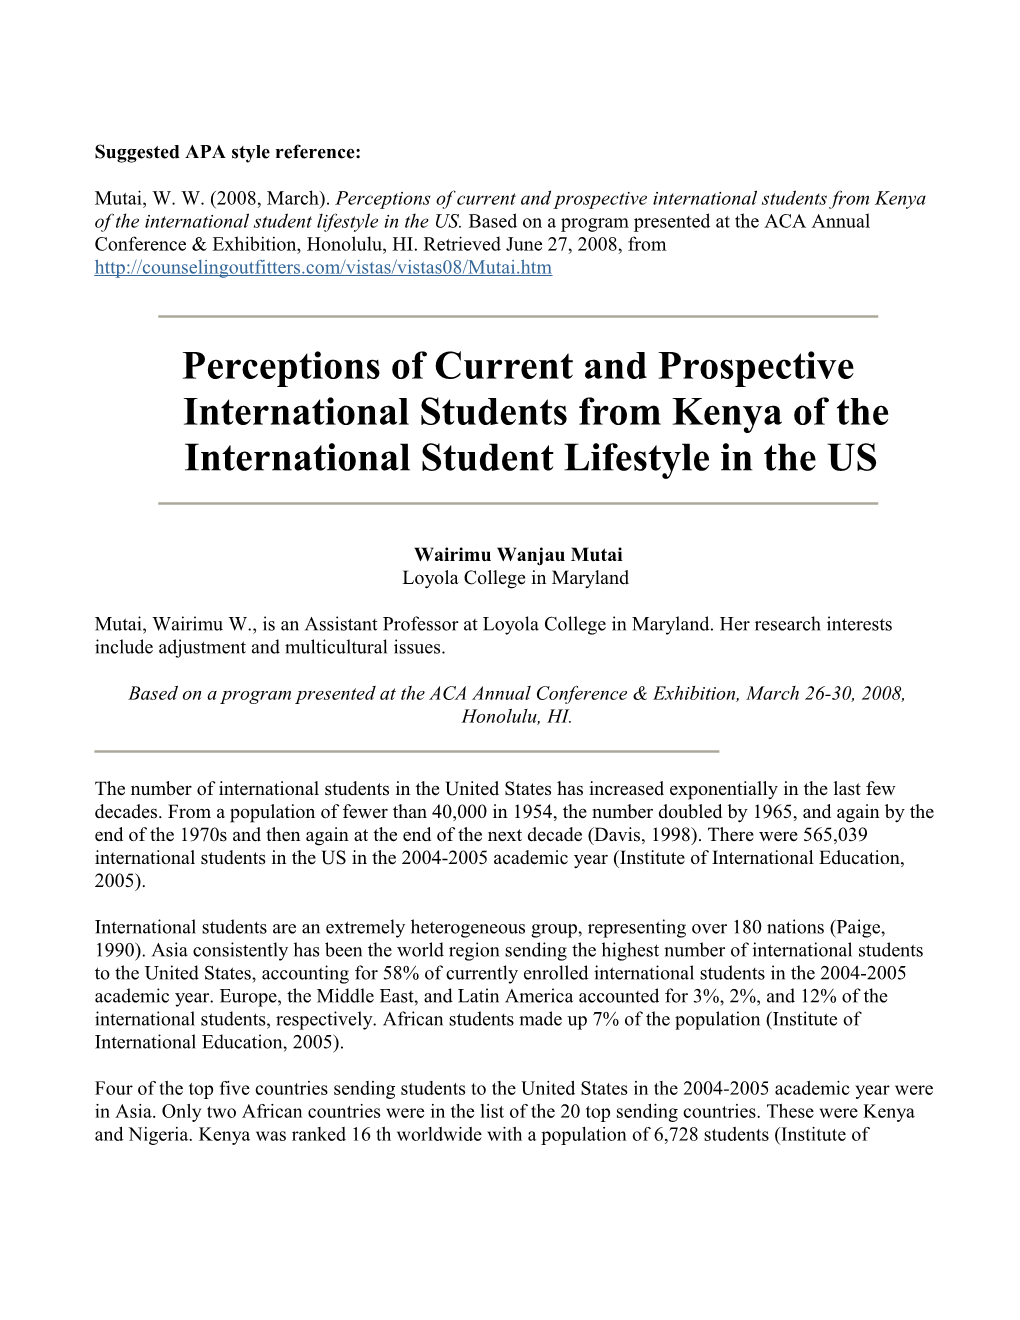 Perceptions of Current and Prospective International Students from Kenya of the International